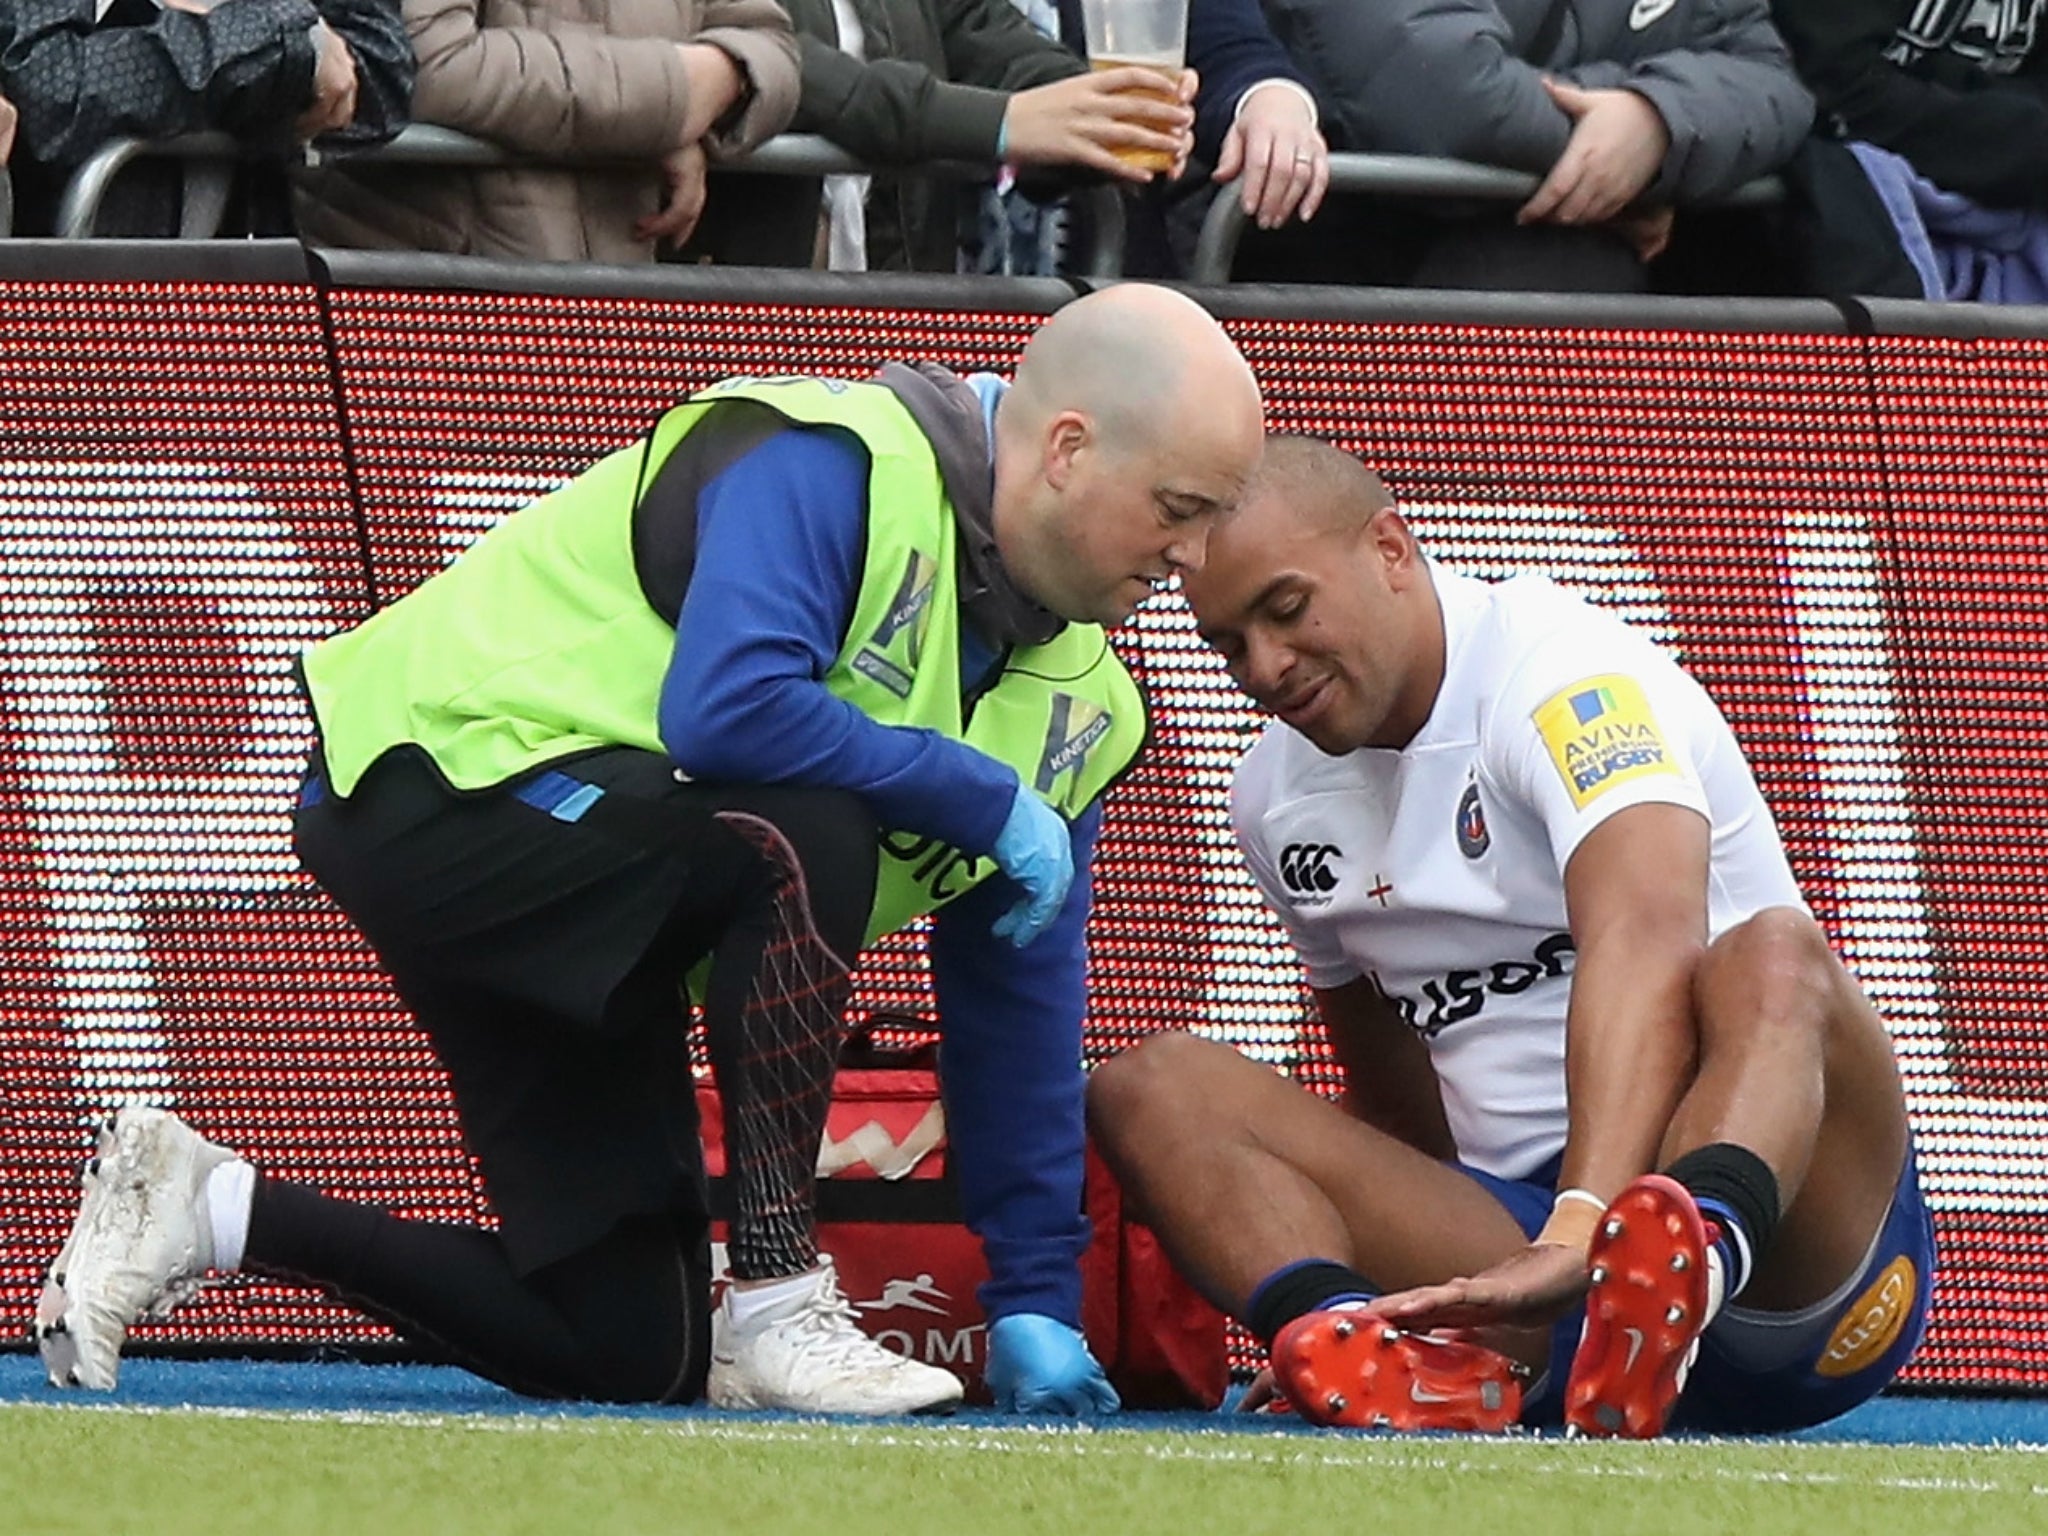 Joseph suffered an ankle injury in Bath's defeat by Saracens